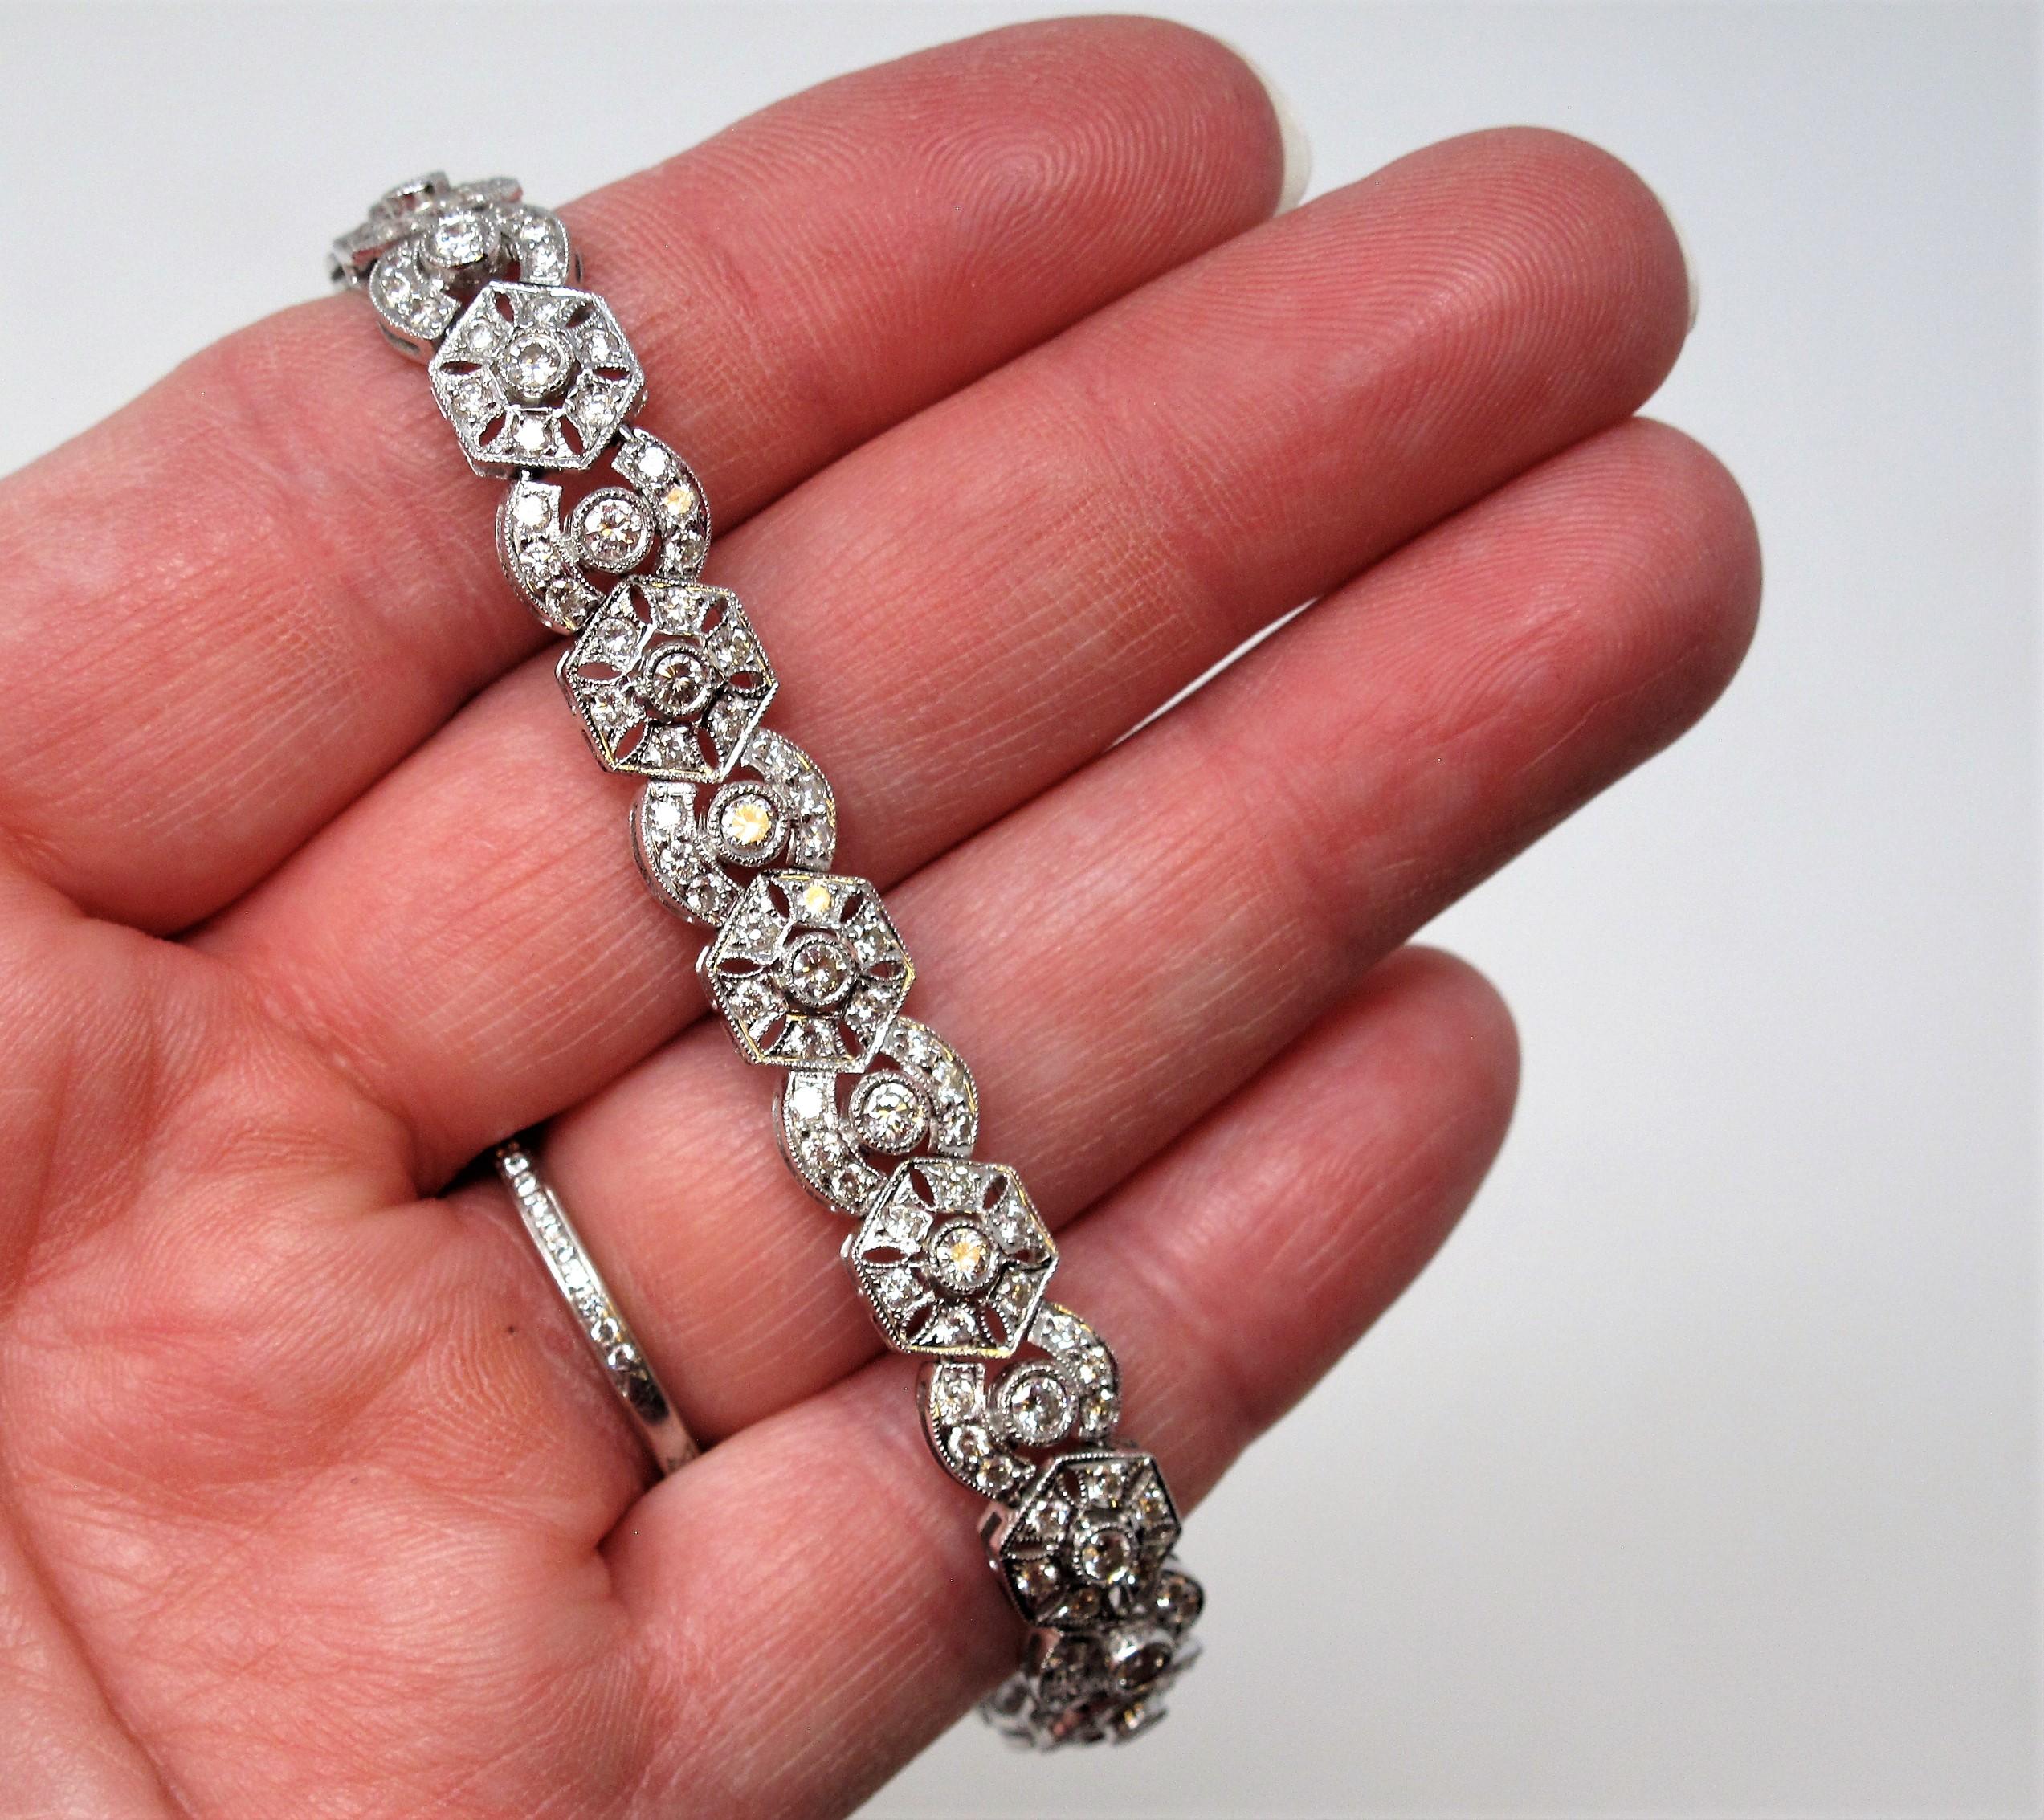 Gorgeous, sparkling diamond bracelet with an elegant twist. The detailed geometric shapes paired with the intricate milgrain detailing adds elevated design and texture to the traditional diamond bracelet. This dazzling piece is sure to impress!